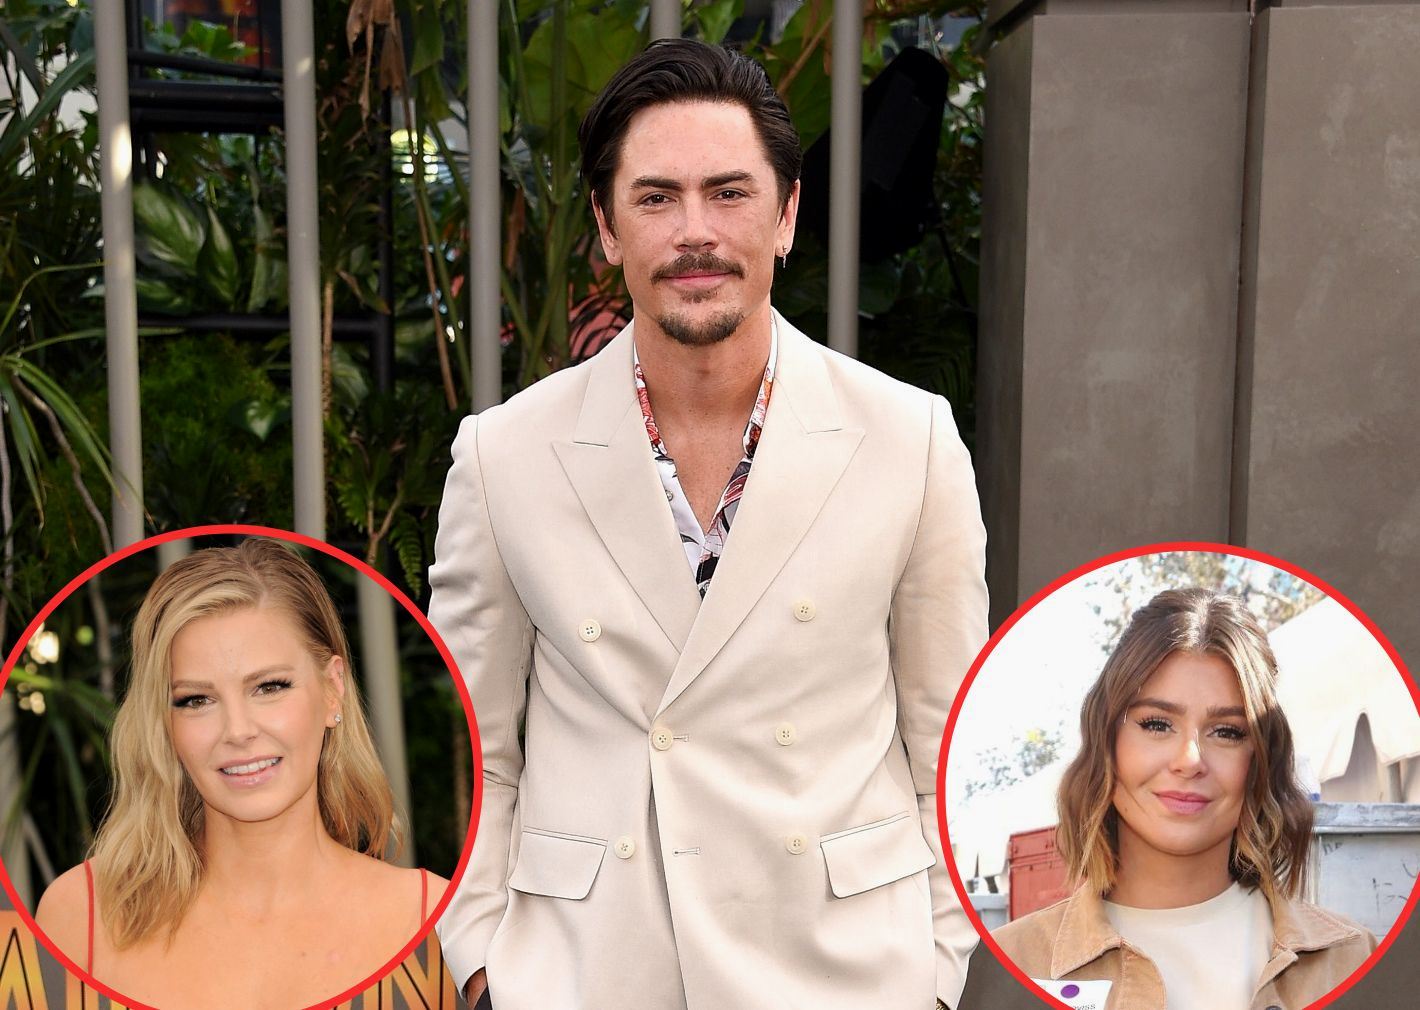 PHOTOS: Tom Sandoval Spotted With Mystery Woman Before Alleged Split as Ariana Confirms She Will No Longer Film Vanderpump Rules With Sandoval or Raquel